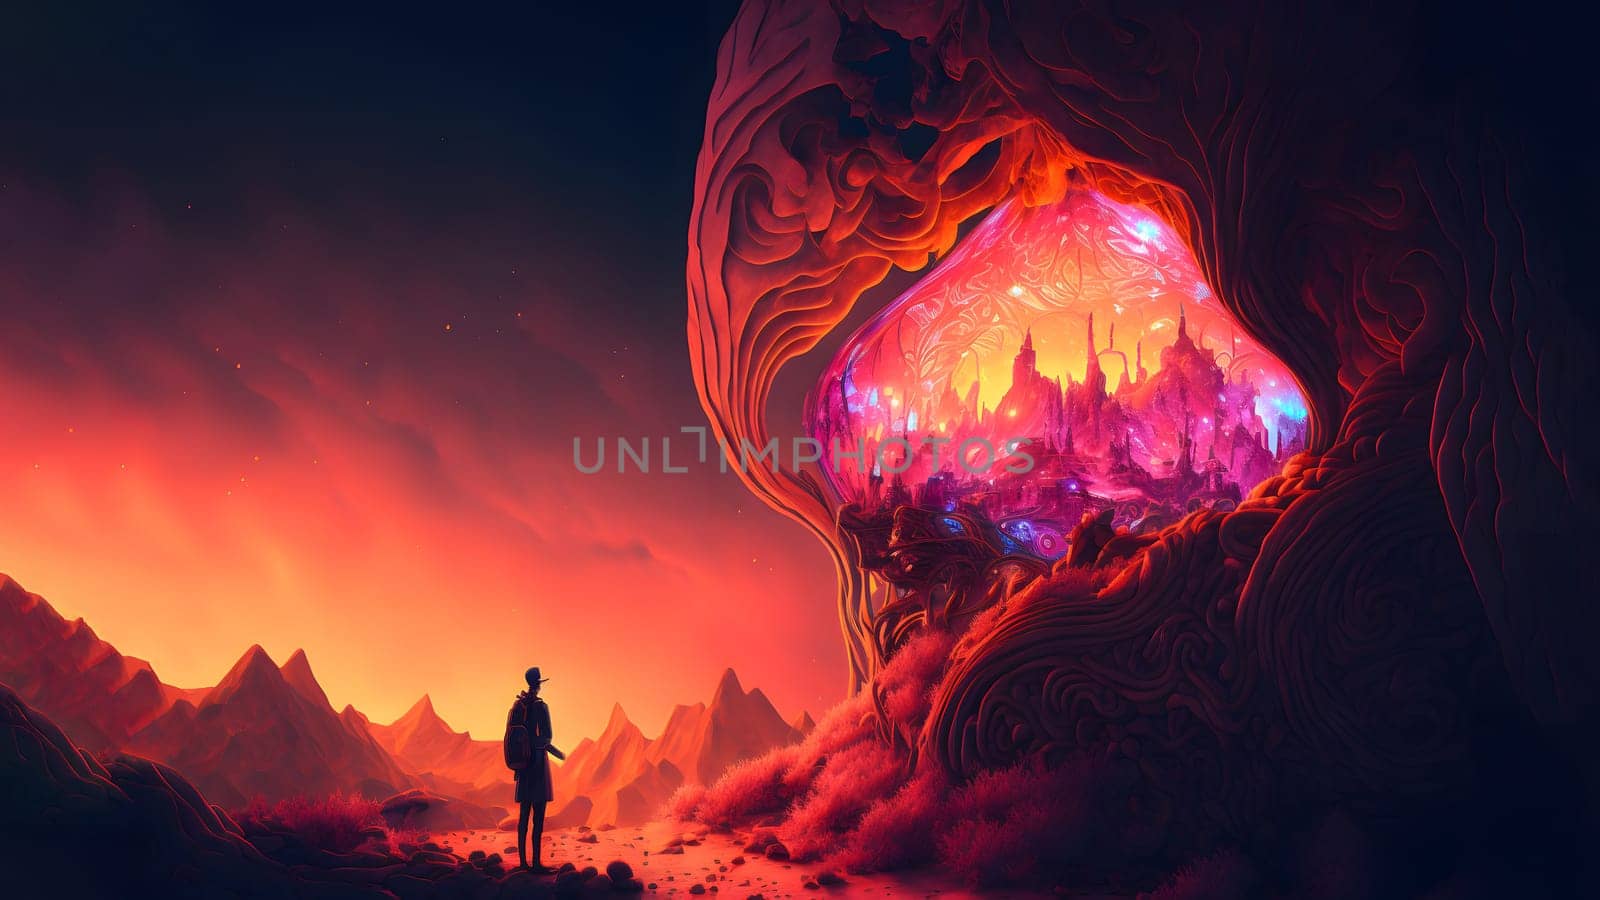 human silhouette in front of surreal magic fantasy world entrance, neural network generated art. Digitally generated image. Not based on any actual person, scene or pattern.